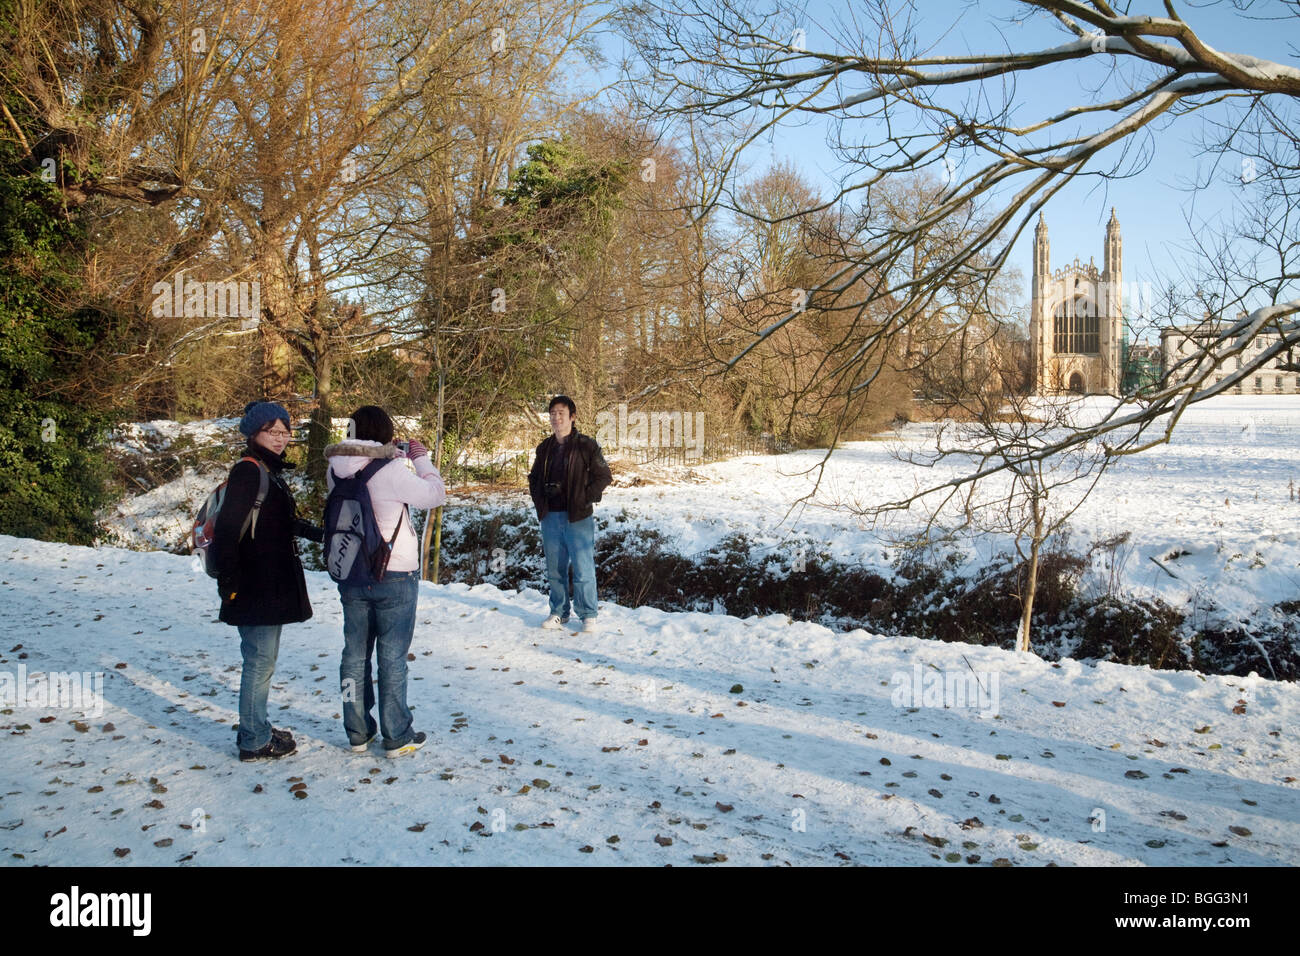 Tourists taking photos on the backs in winter, Kings College chapel in the background, Cambridge, UK Stock Photo